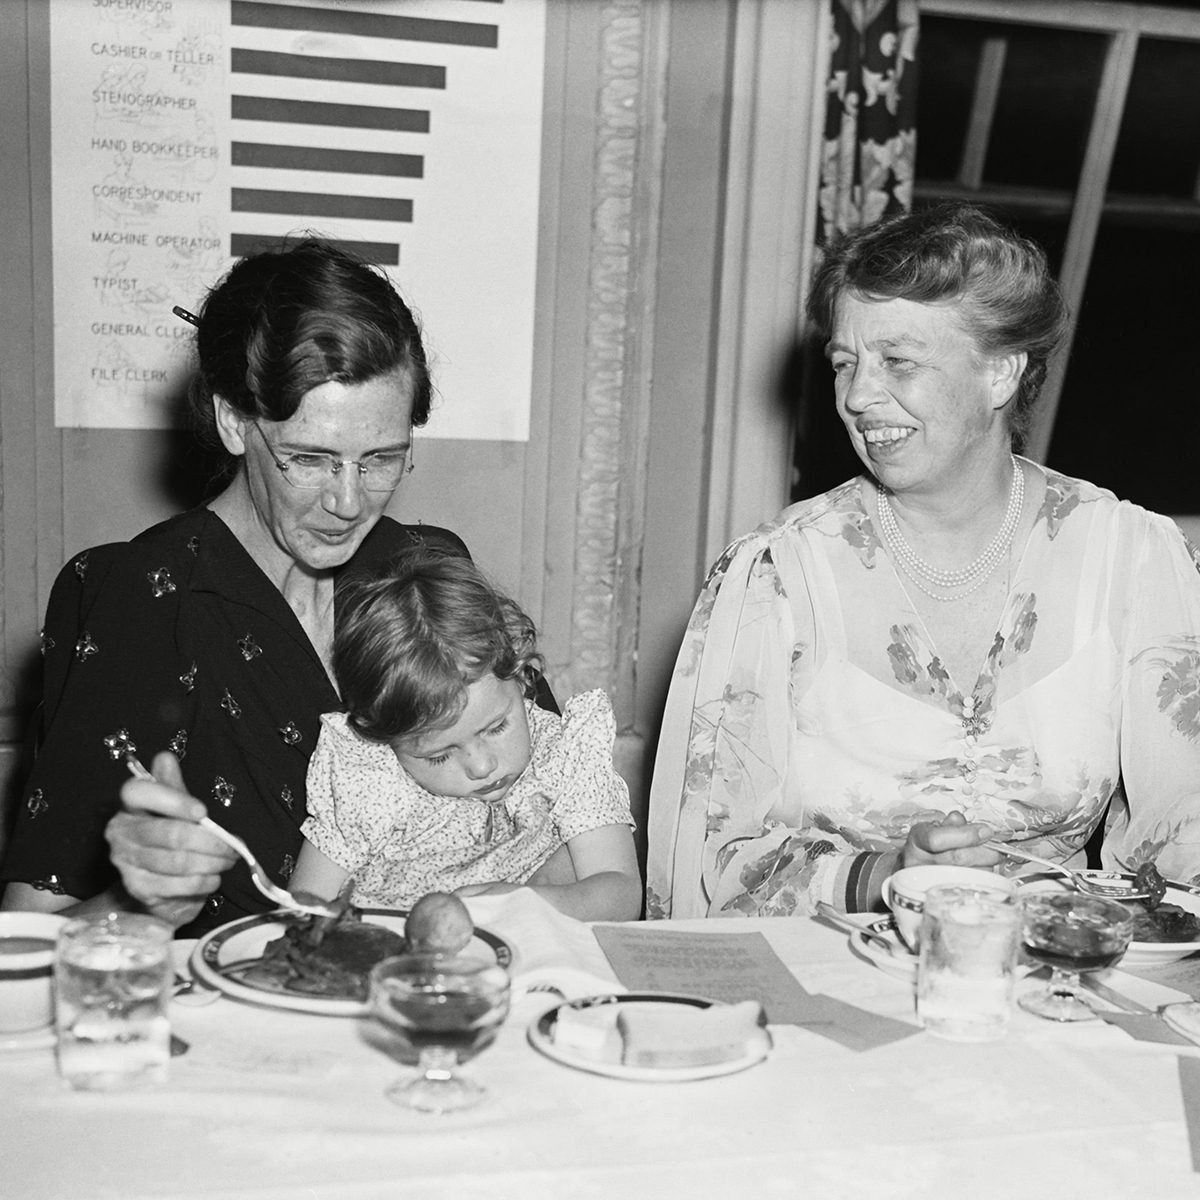 Mandatory Credit: Photo by Everett/Shutterstock (10293567a) First Lady Eleanor Roosevelt at the Daughters of the American Depression Conference, May 14, 1940. On left, Federal relief clients, Mrs. Hugh Easley and her daughter of St. Louis, eat a Five Cent Relief Meal with the First Lady. The conference name is a play on Daughters of the American Revolution Historical Collection